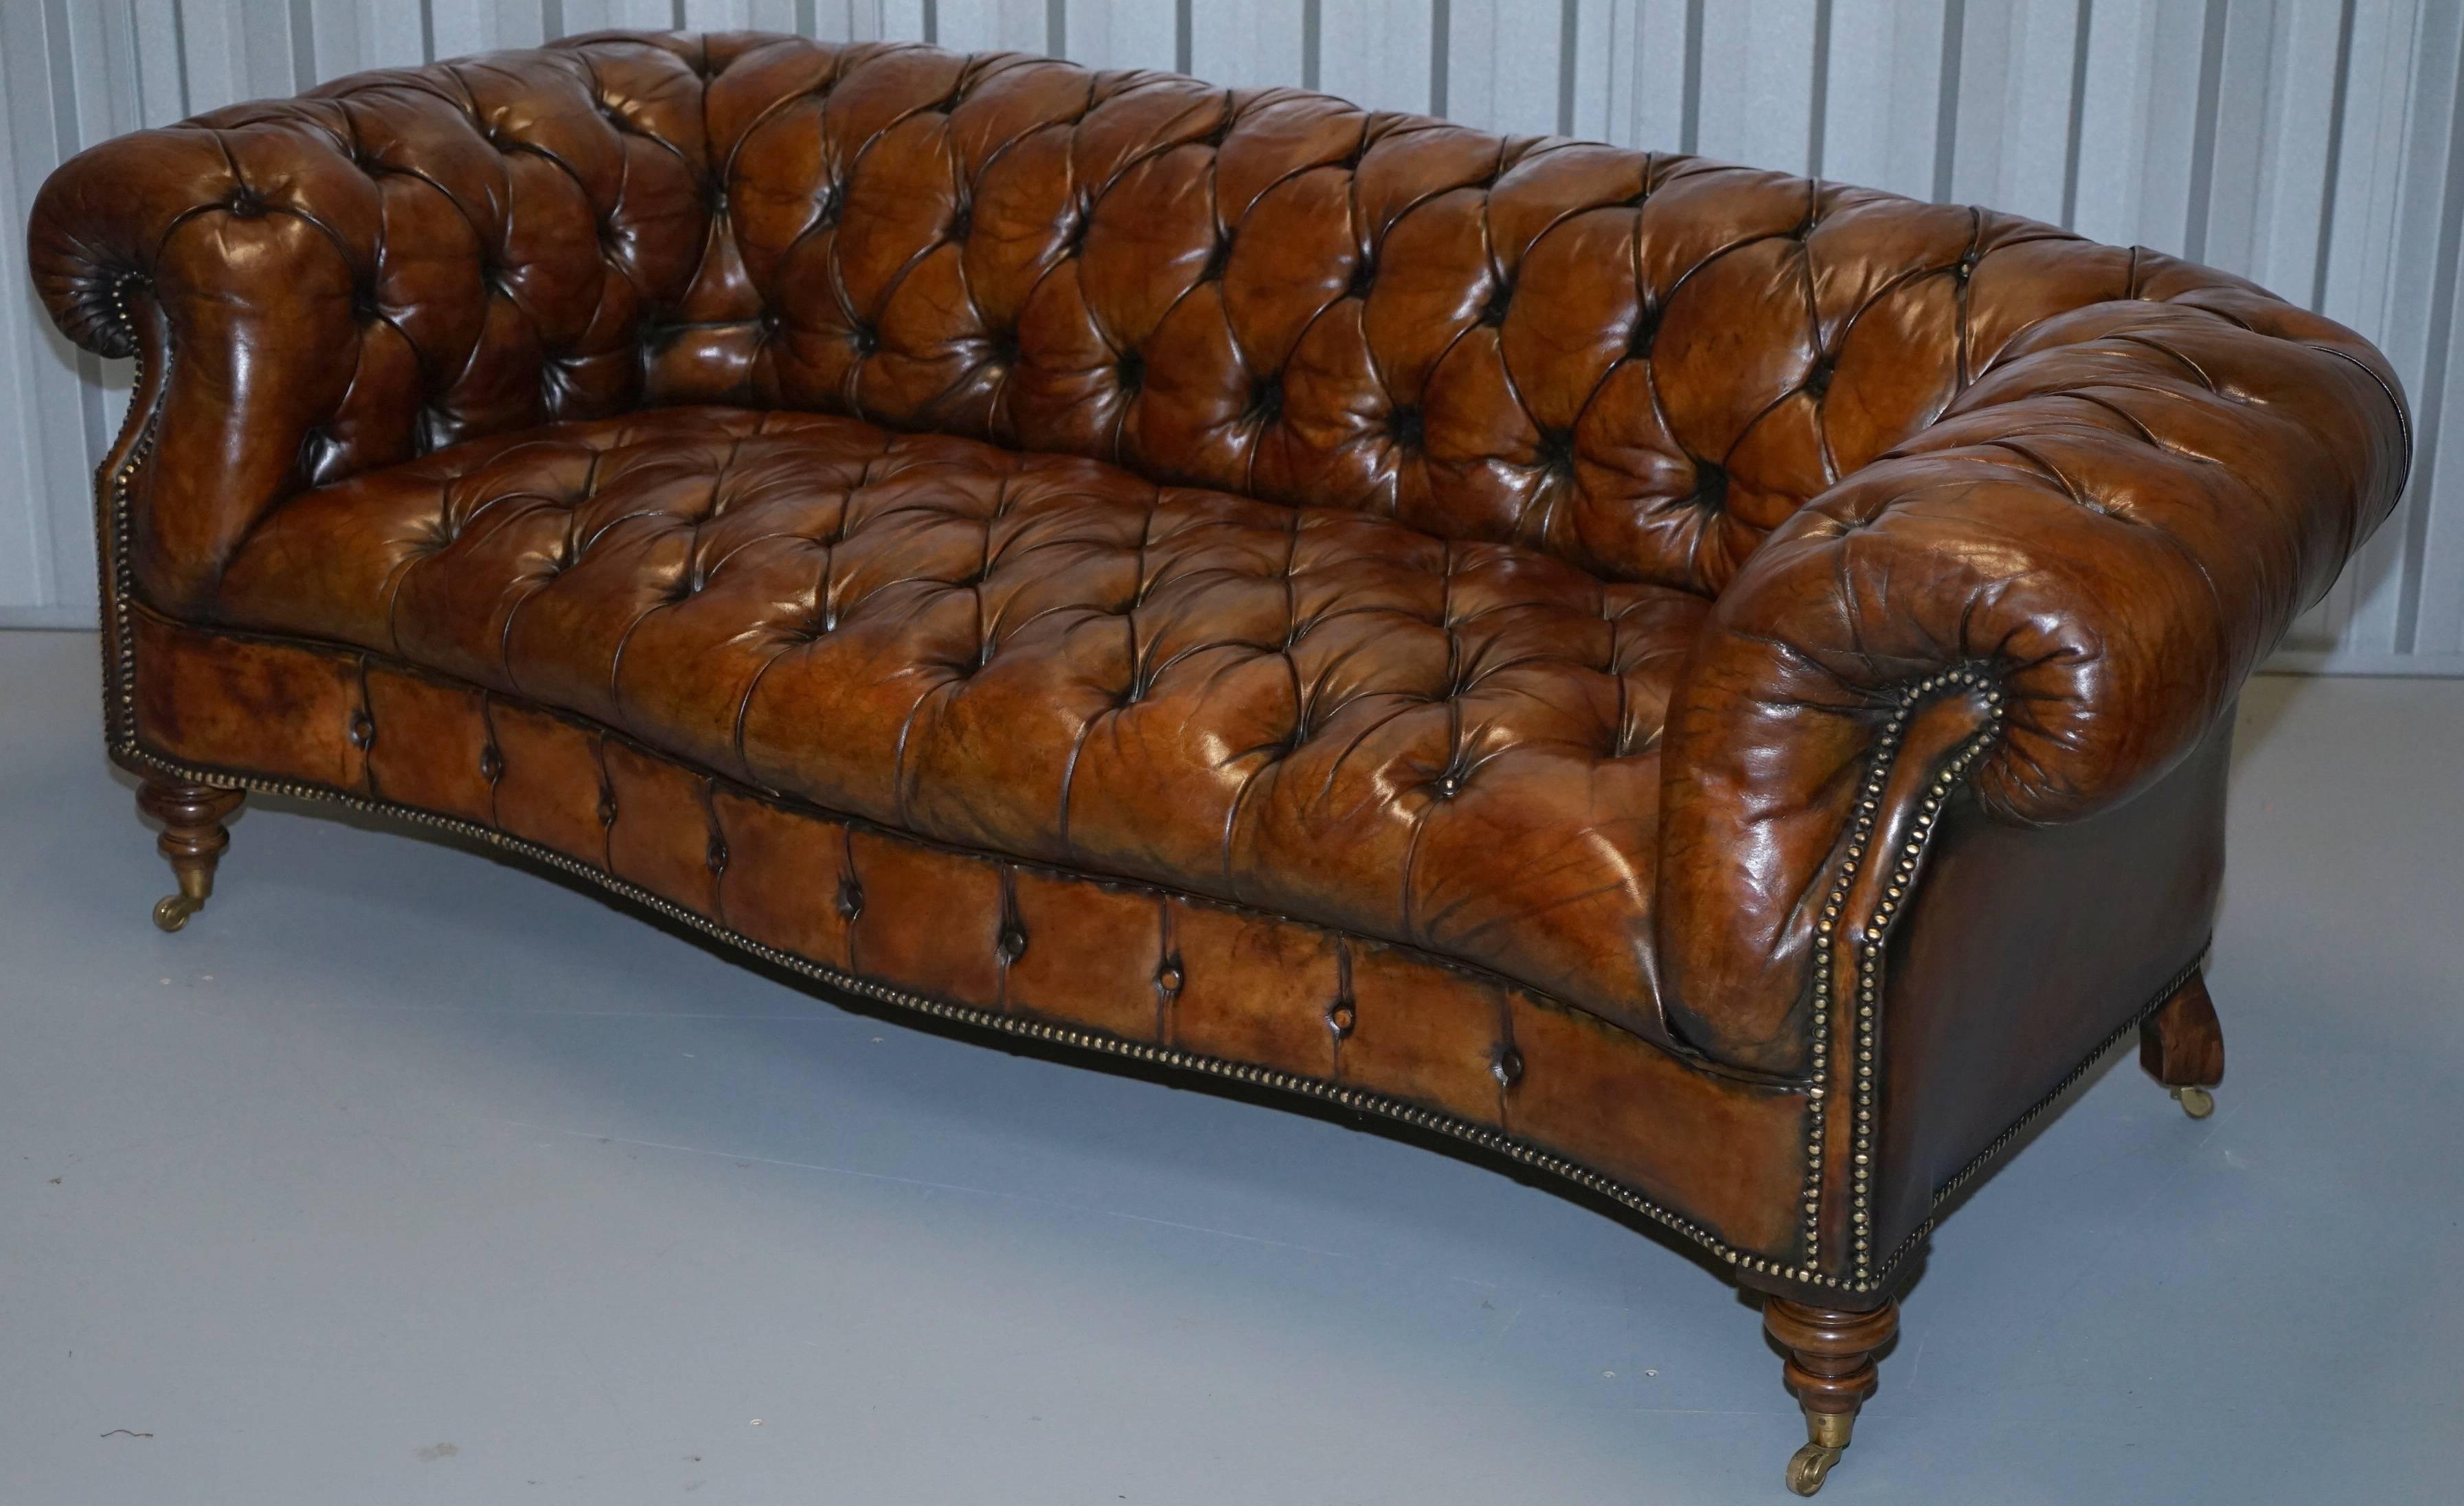 Great Britain (UK) Pair of Fully Restored Howard & Son's Style Victorian Chesterfield Leather Sofas